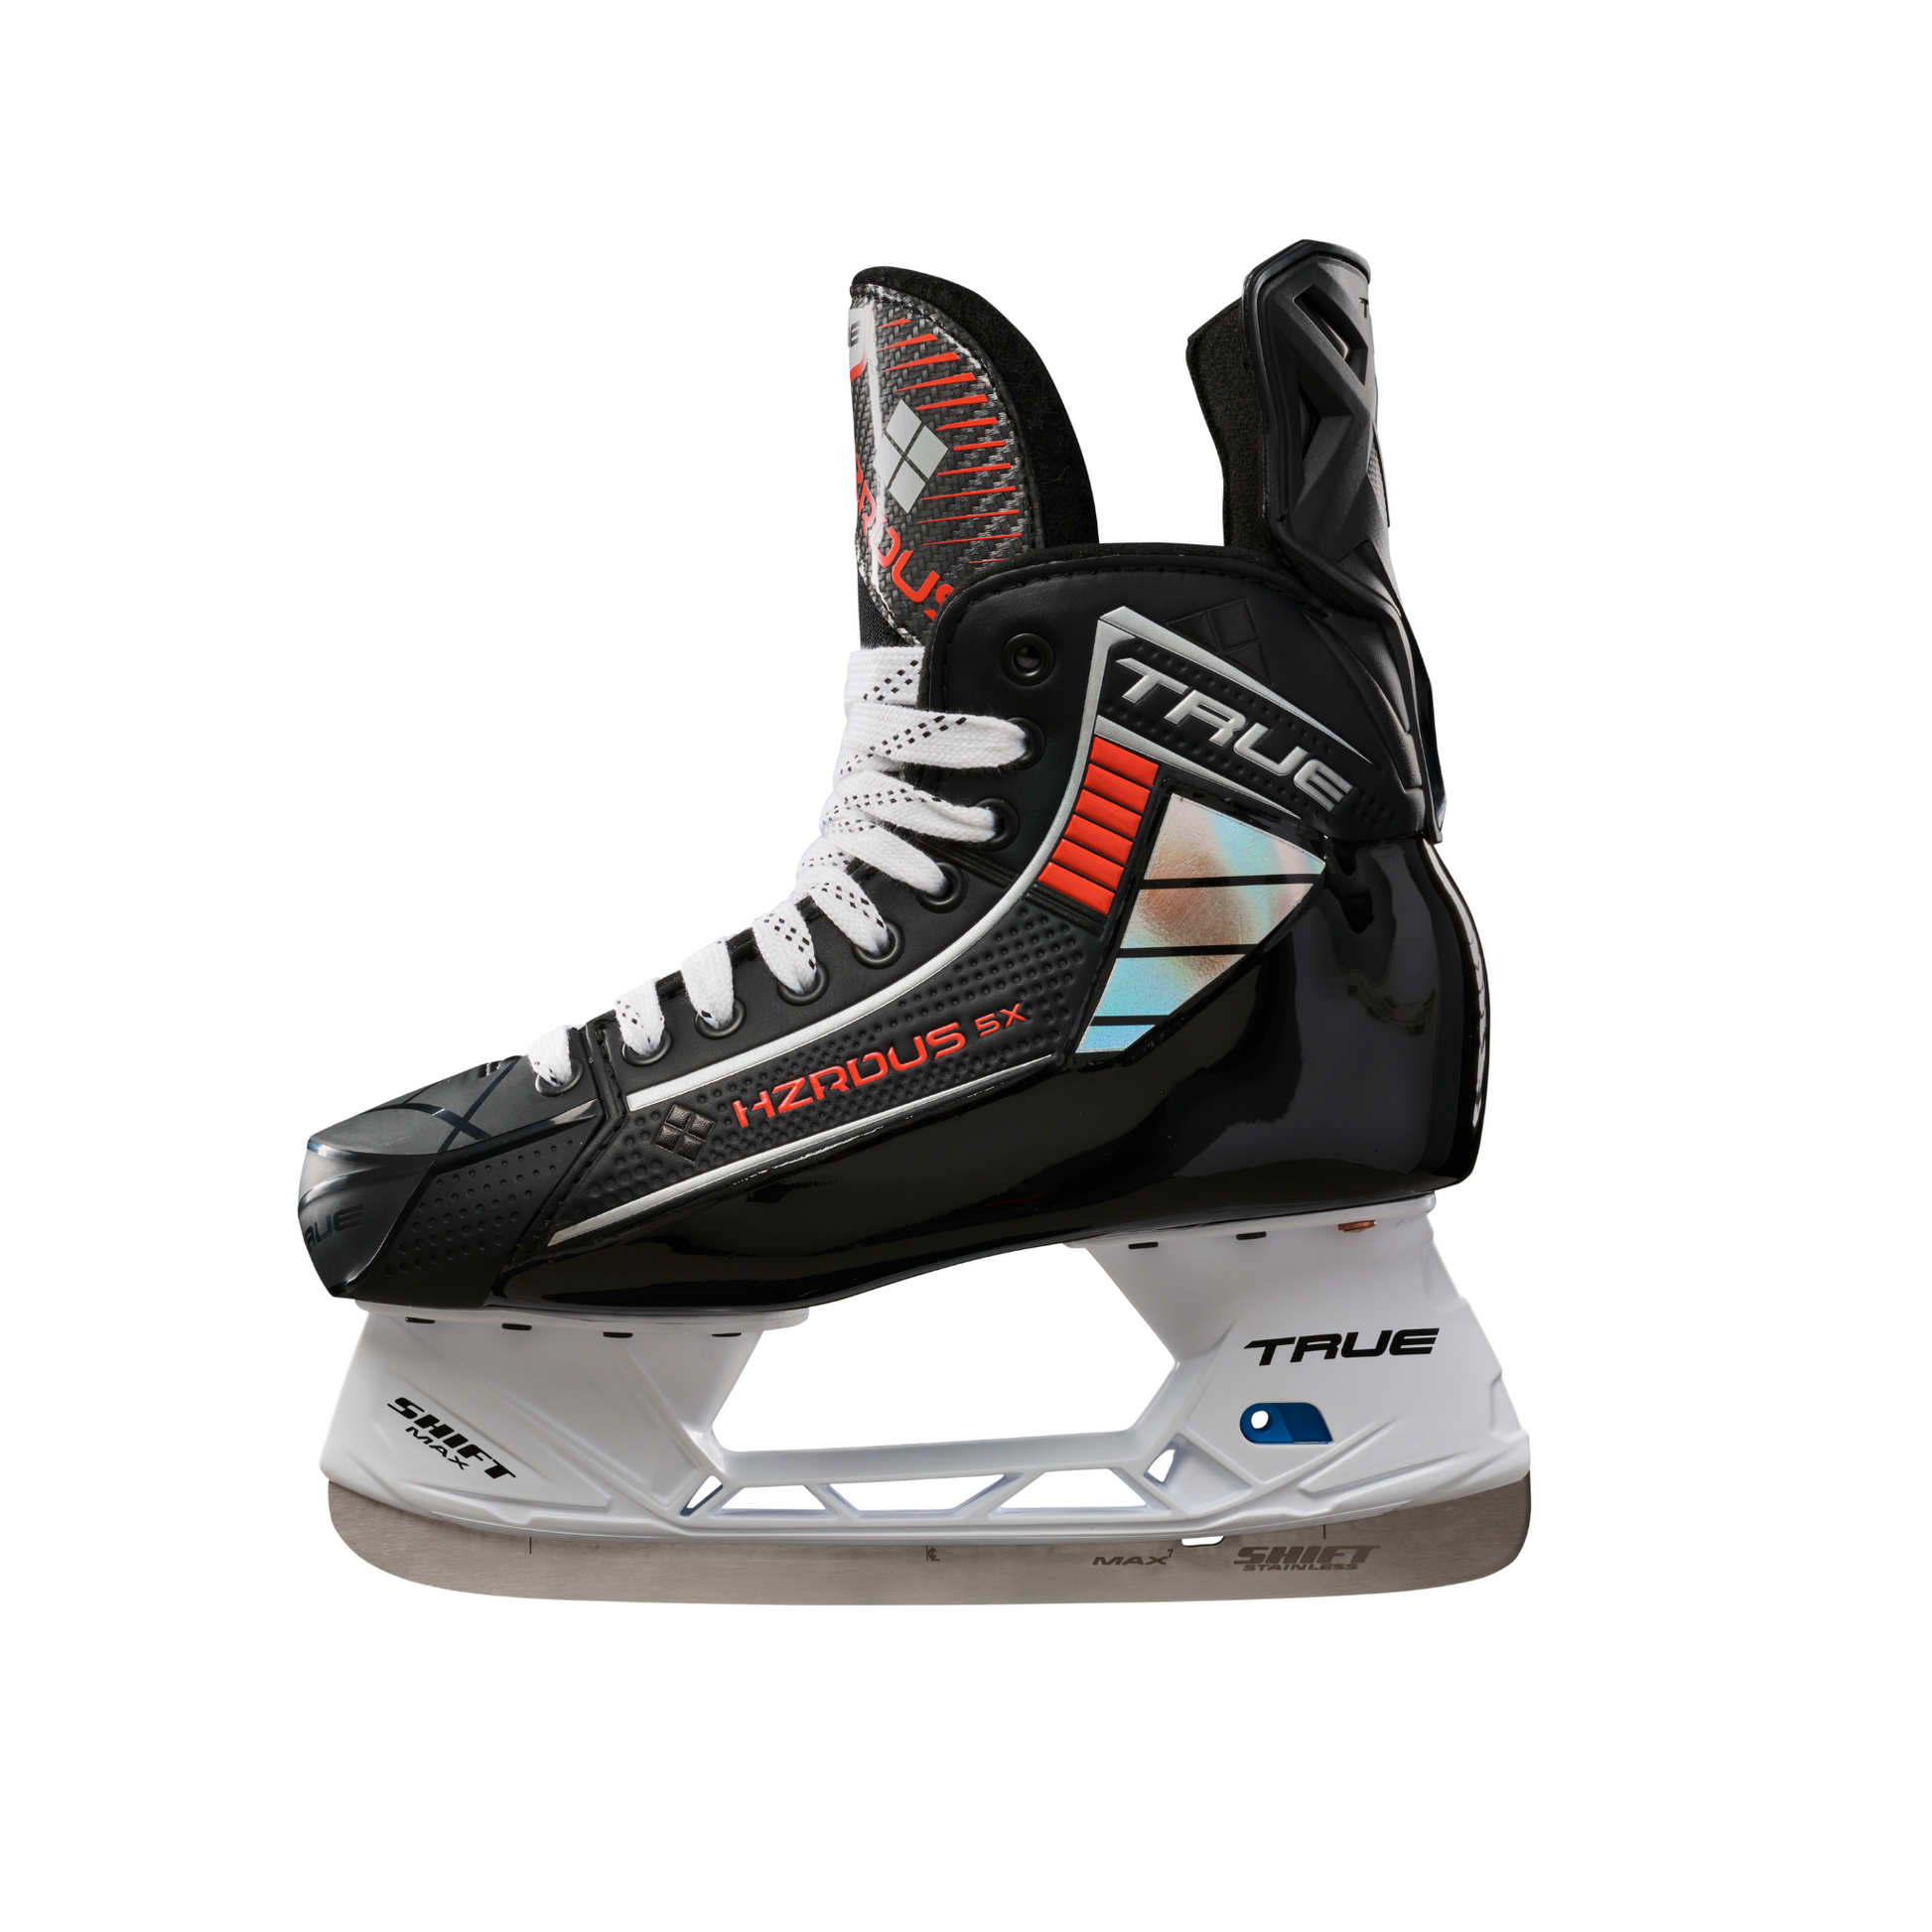 True HZERDUS 5X Senior Hockey Skate in colour black and red side view.